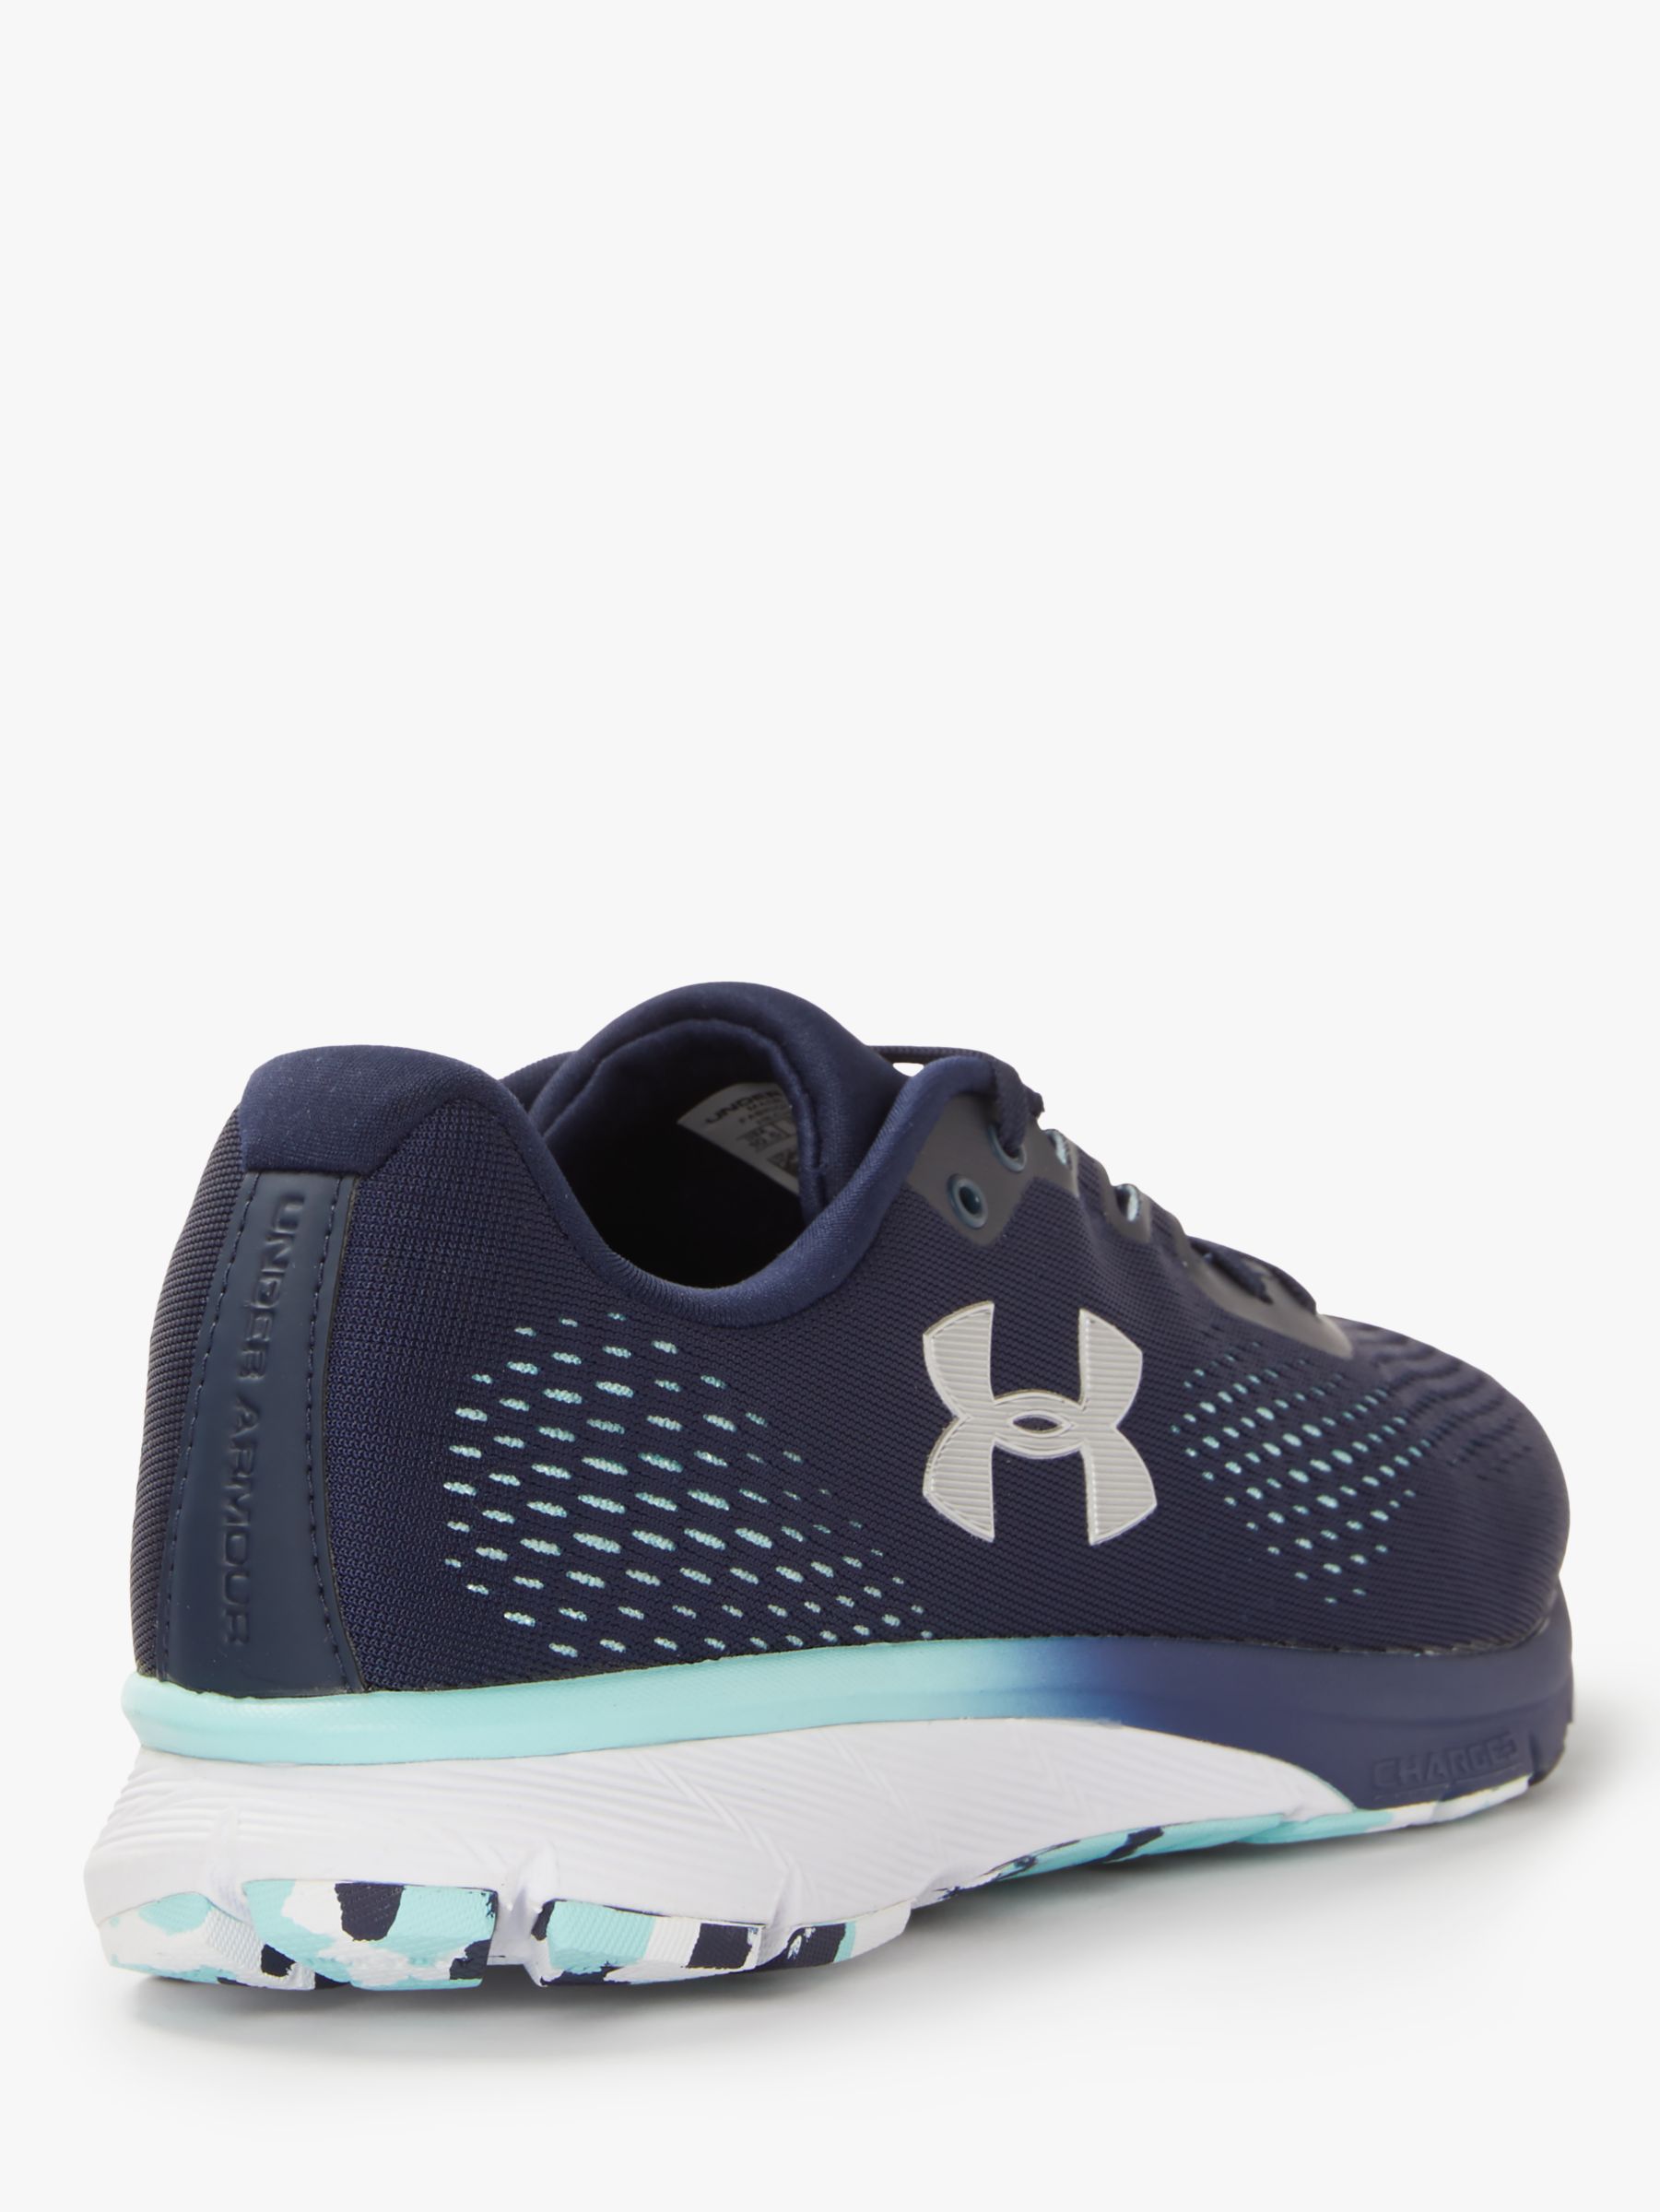 Under Armour Charged Spark Women's 